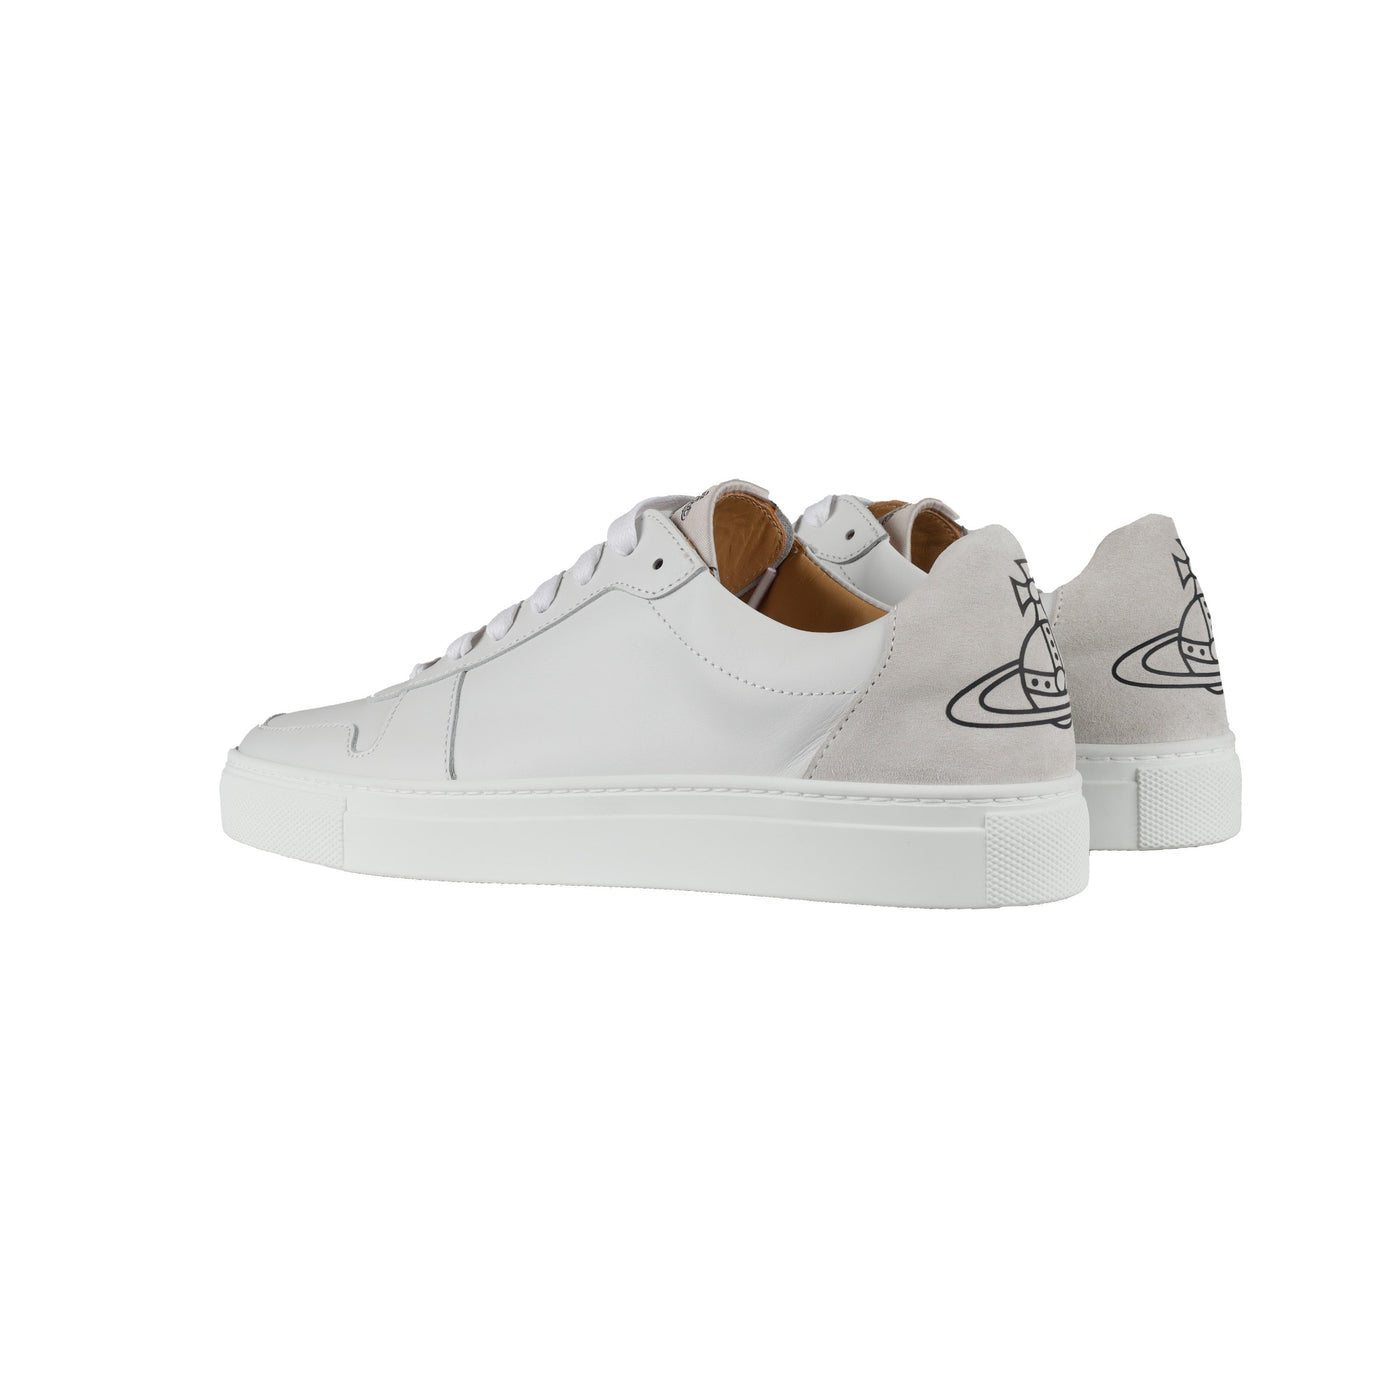 Secondhand Vivienne Westwood Low Top Apollo Trainers